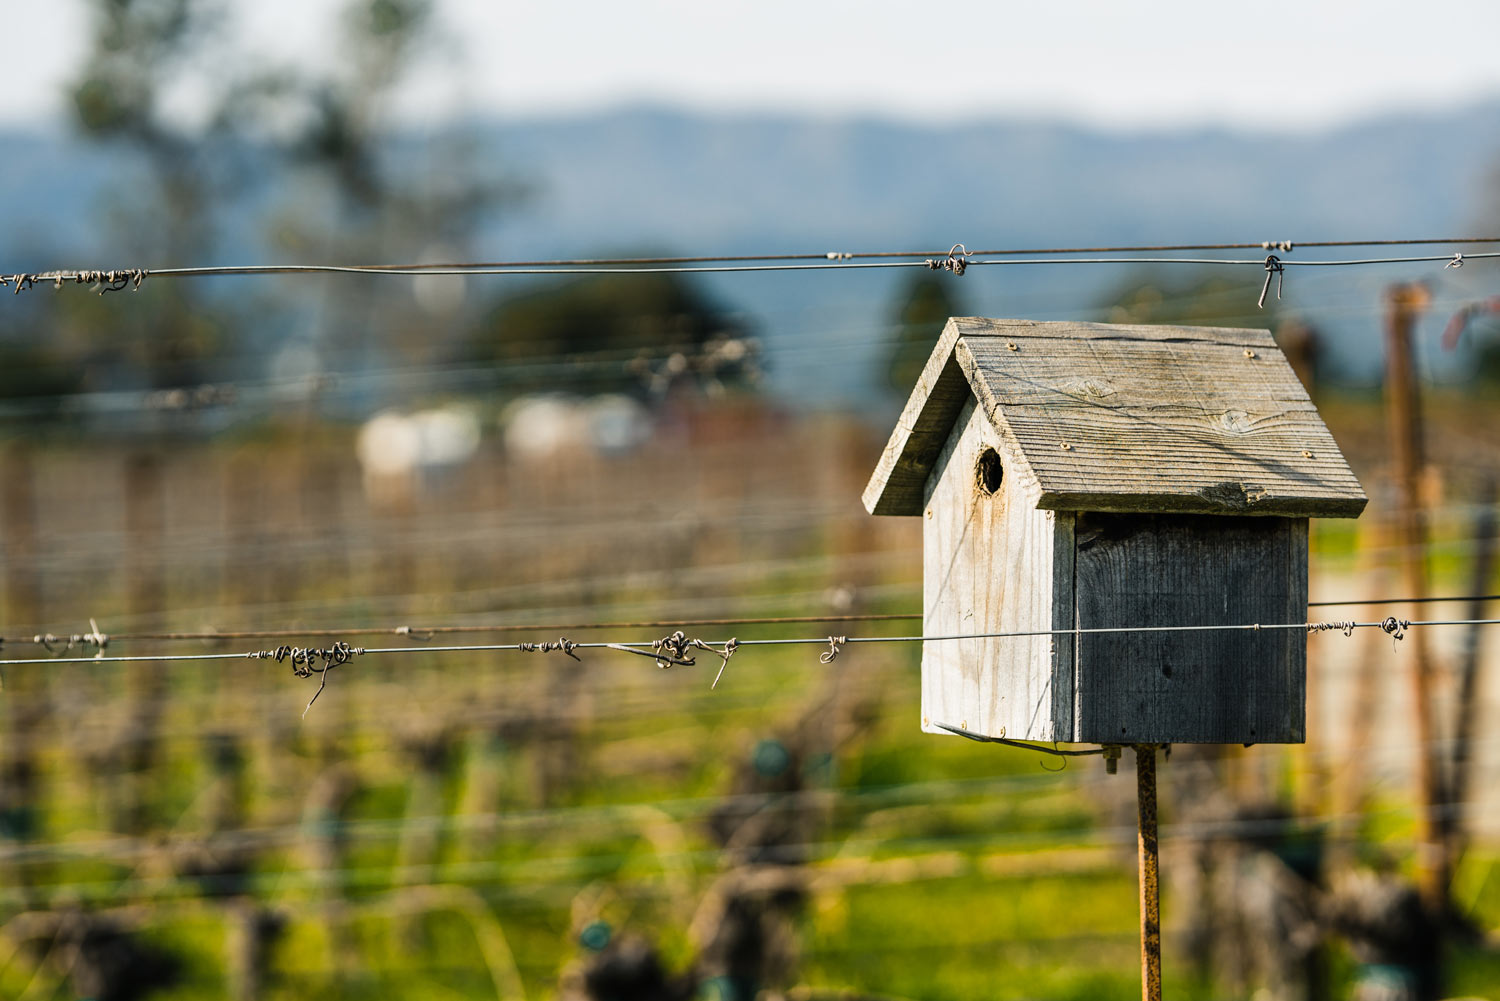 View of a bird house in the Trailside Vineyard